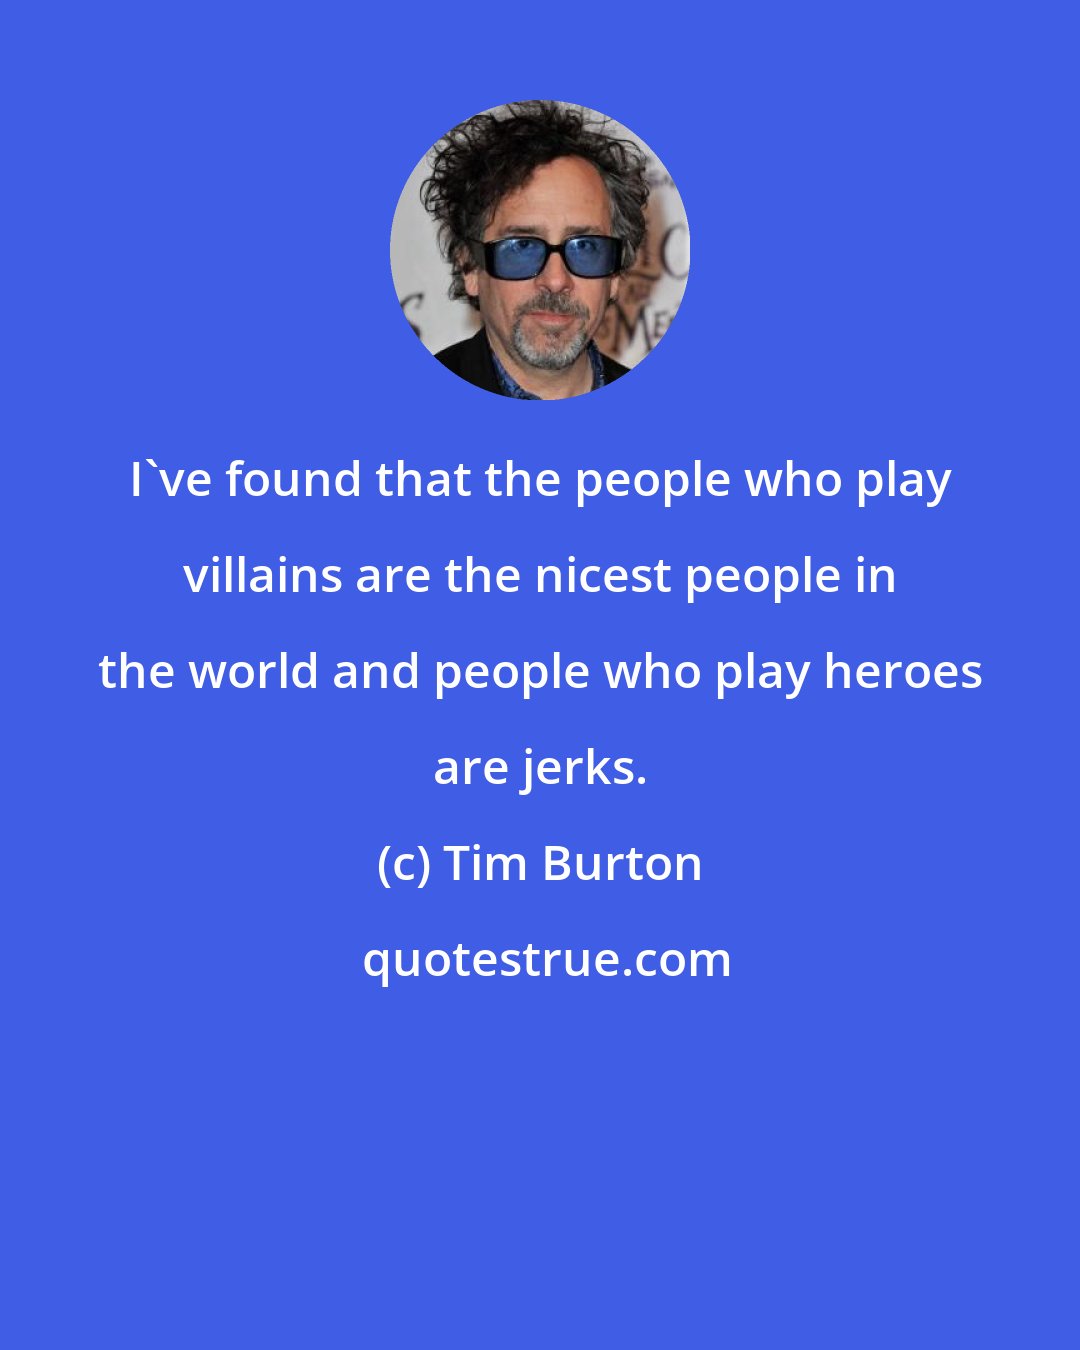 Tim Burton: I've found that the people who play villains are the nicest people in the world and people who play heroes are jerks.